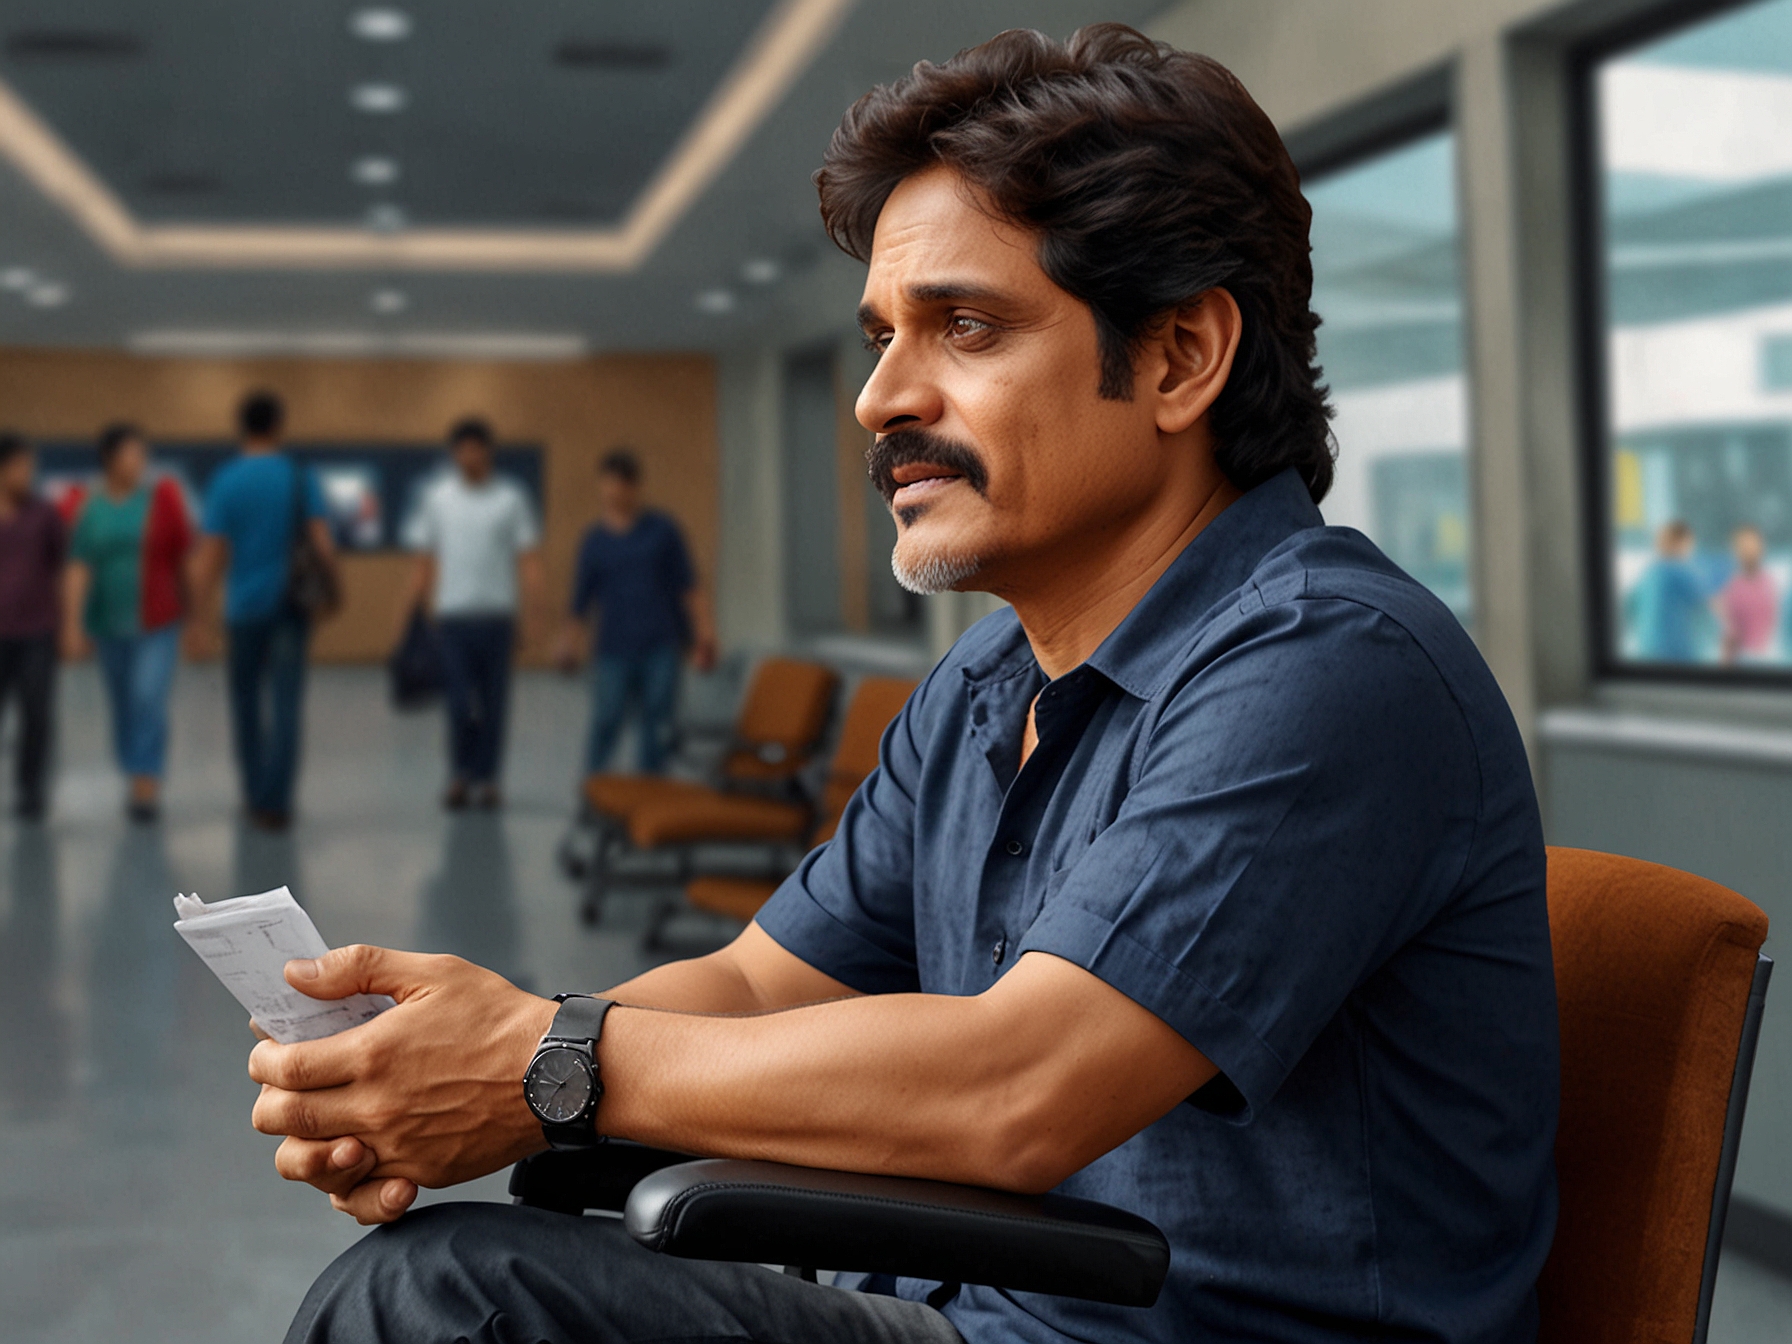 Nagarjuna's heartfelt apology to his differently-abled fan, captured through a touching social media post, illustrating his commitment to addressing and rectifying the unfortunate incident at the airport.